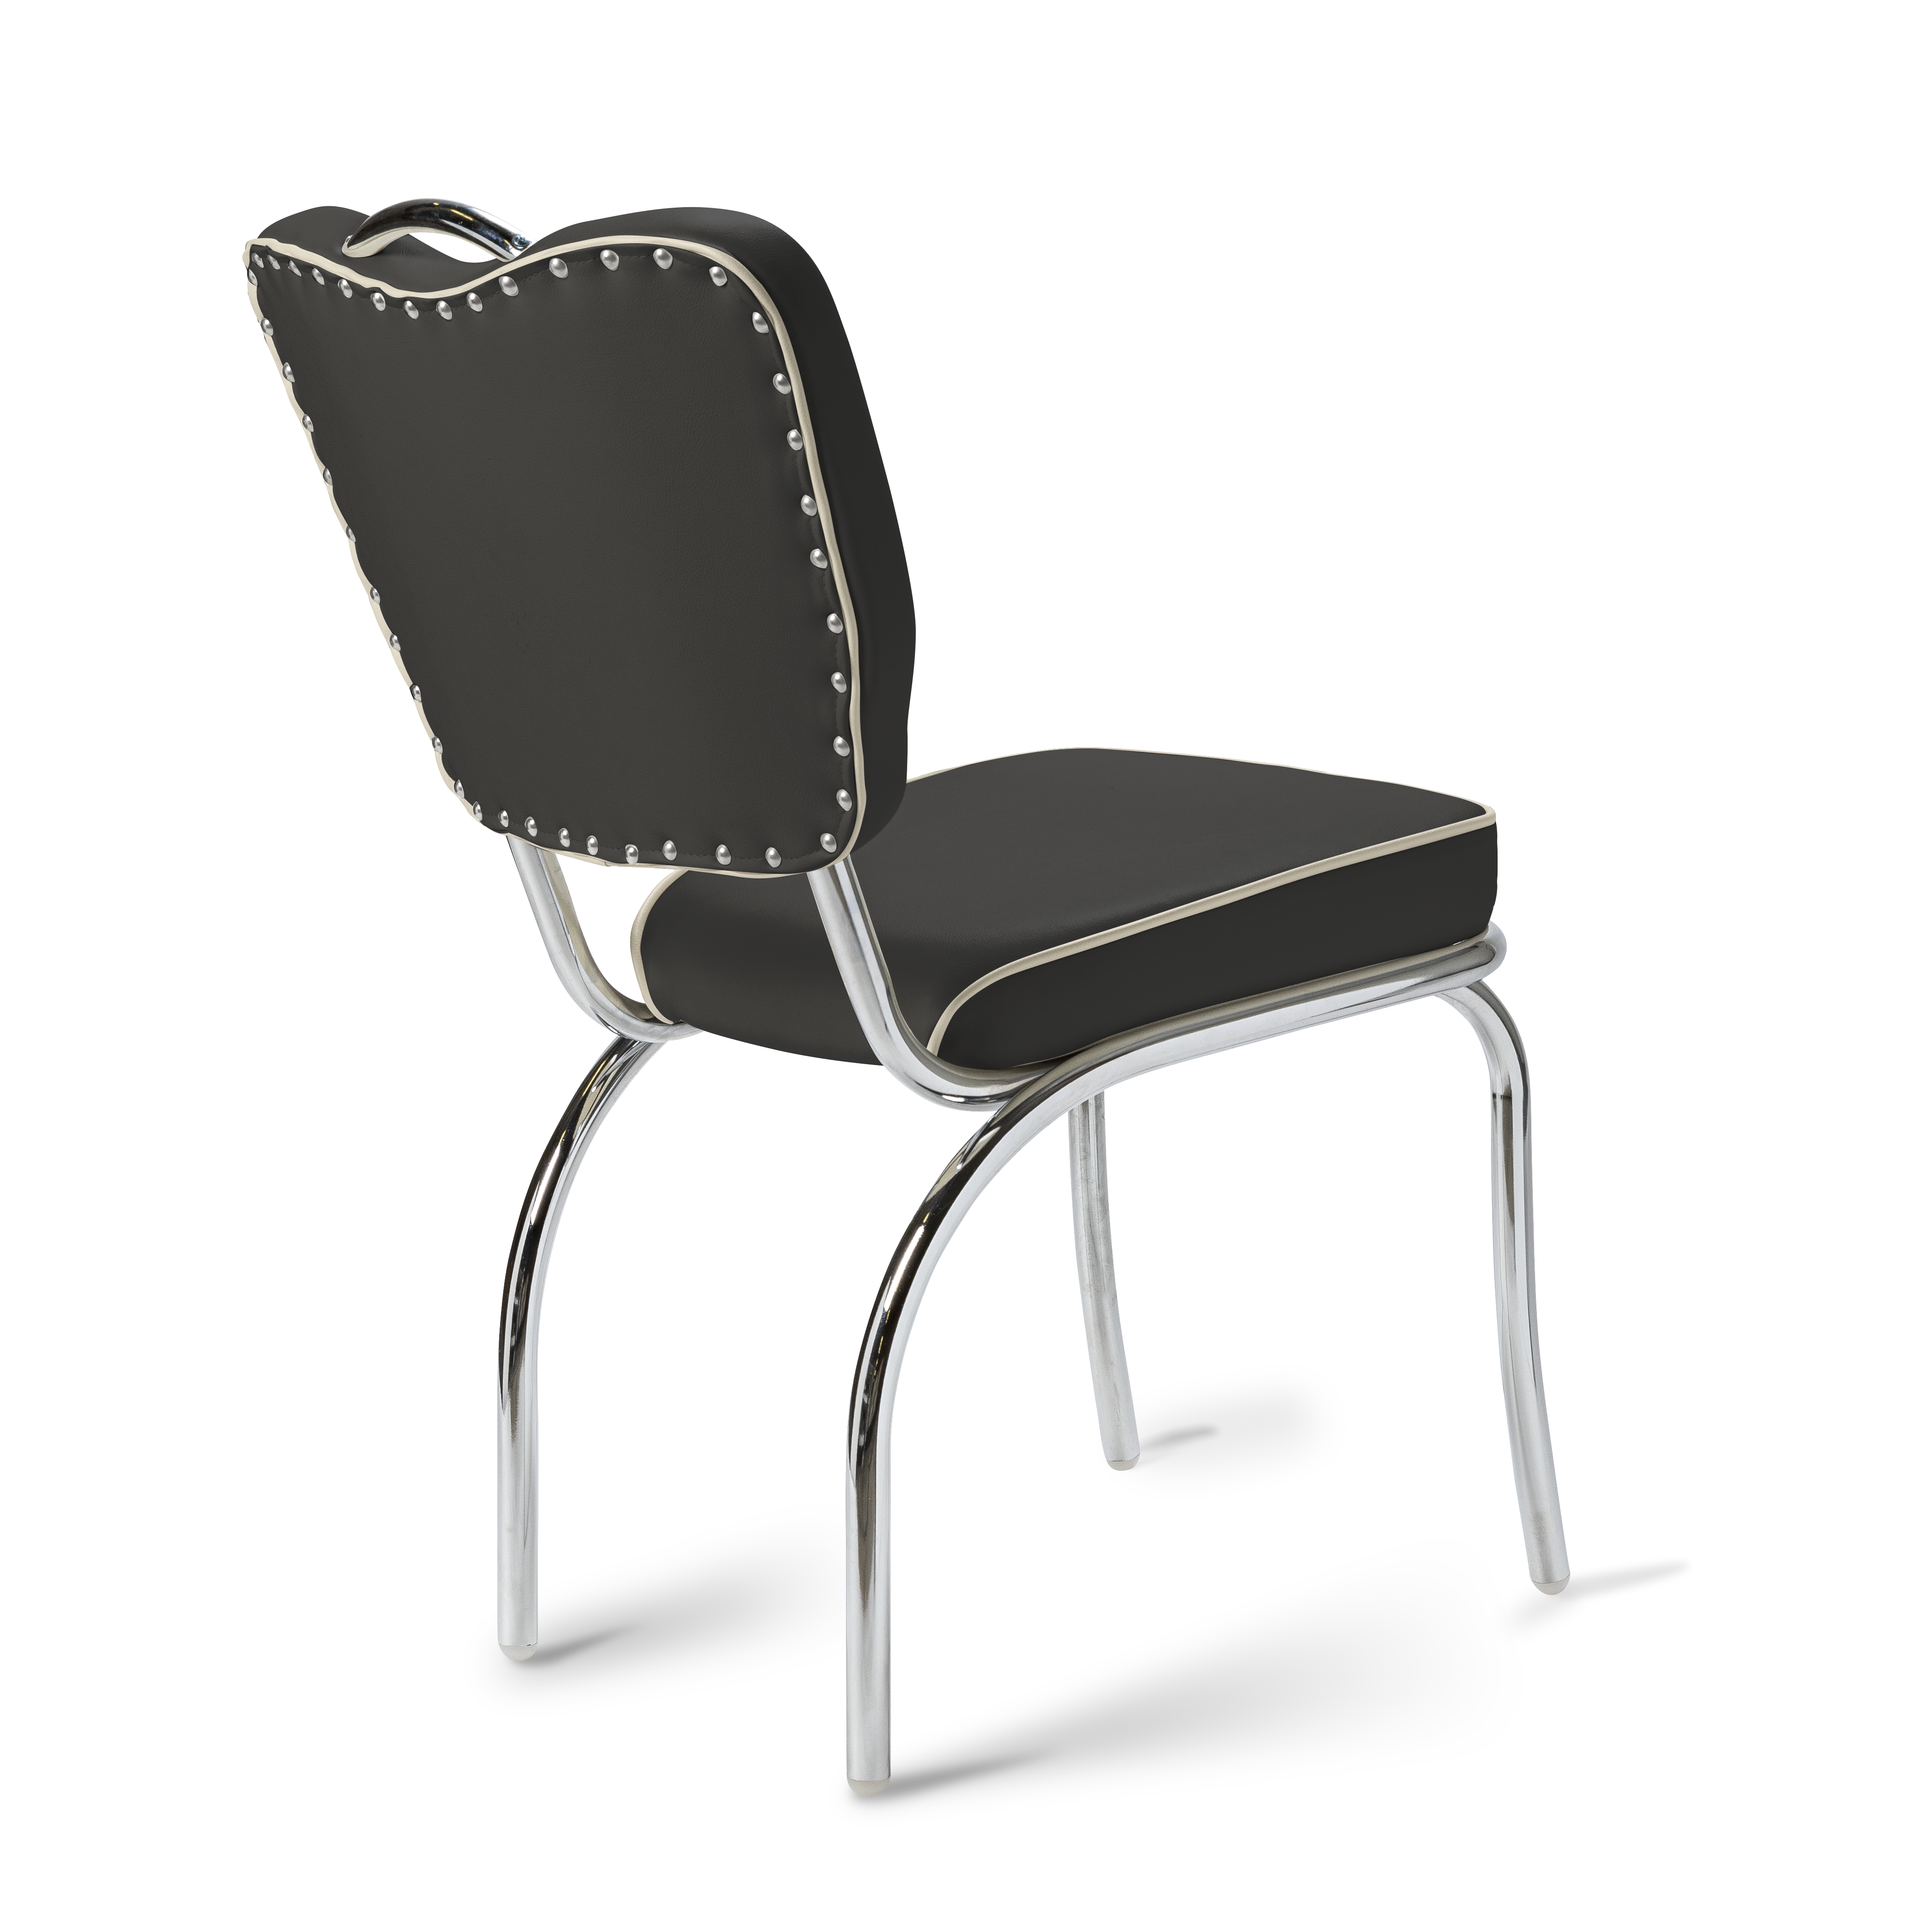 Majestic Chair WP Chrome